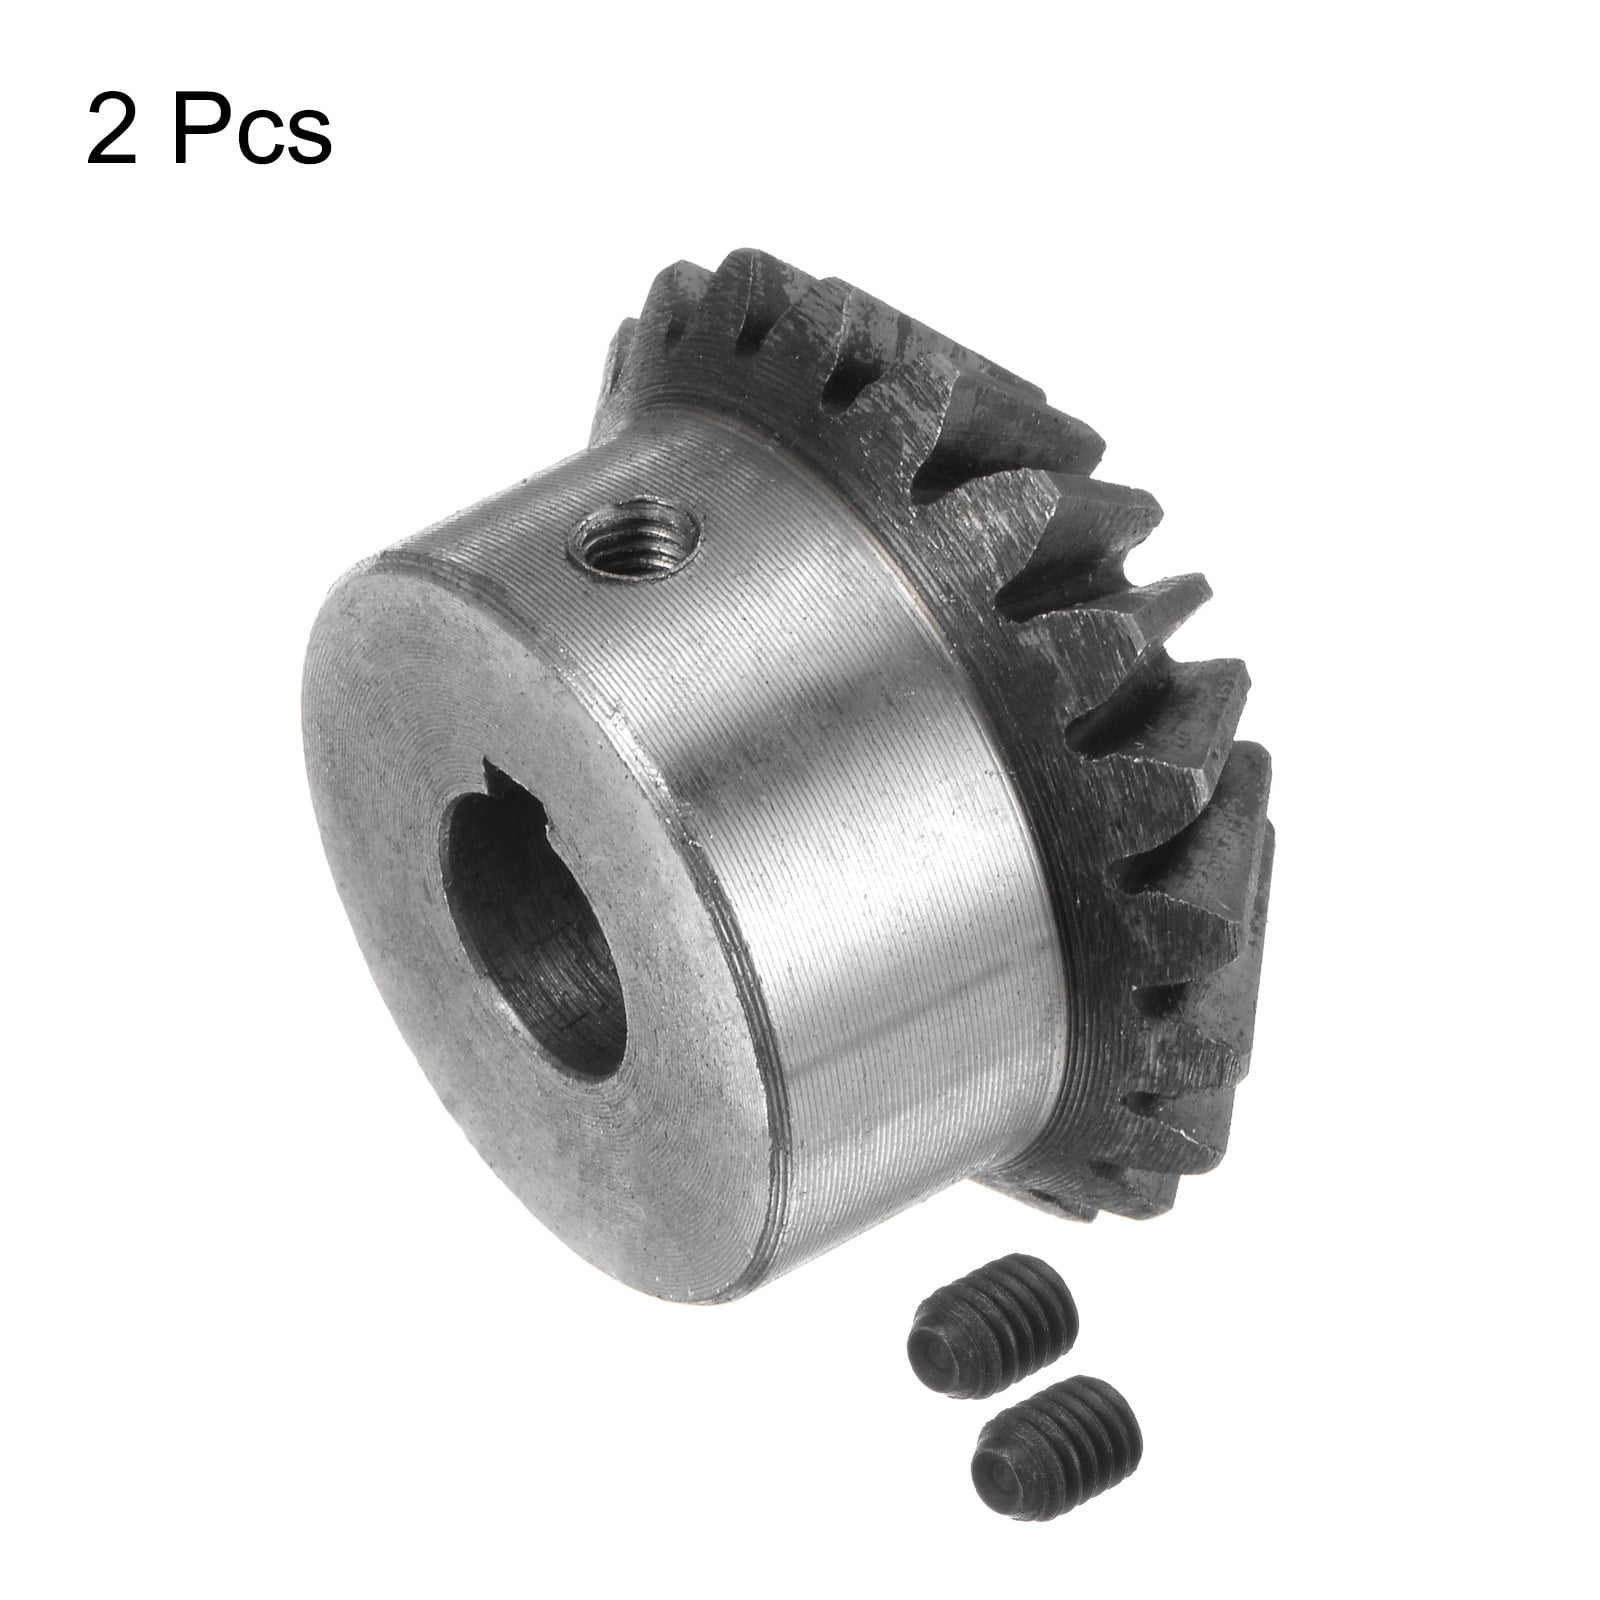  2Pcs Bevel Gear Tapered Bevel Pinion Gear Bevel Gears 2 Module  20 Teeth for Hardware Mechanical Rotation (20T 12mm Hole) : Industrial &  Scientific